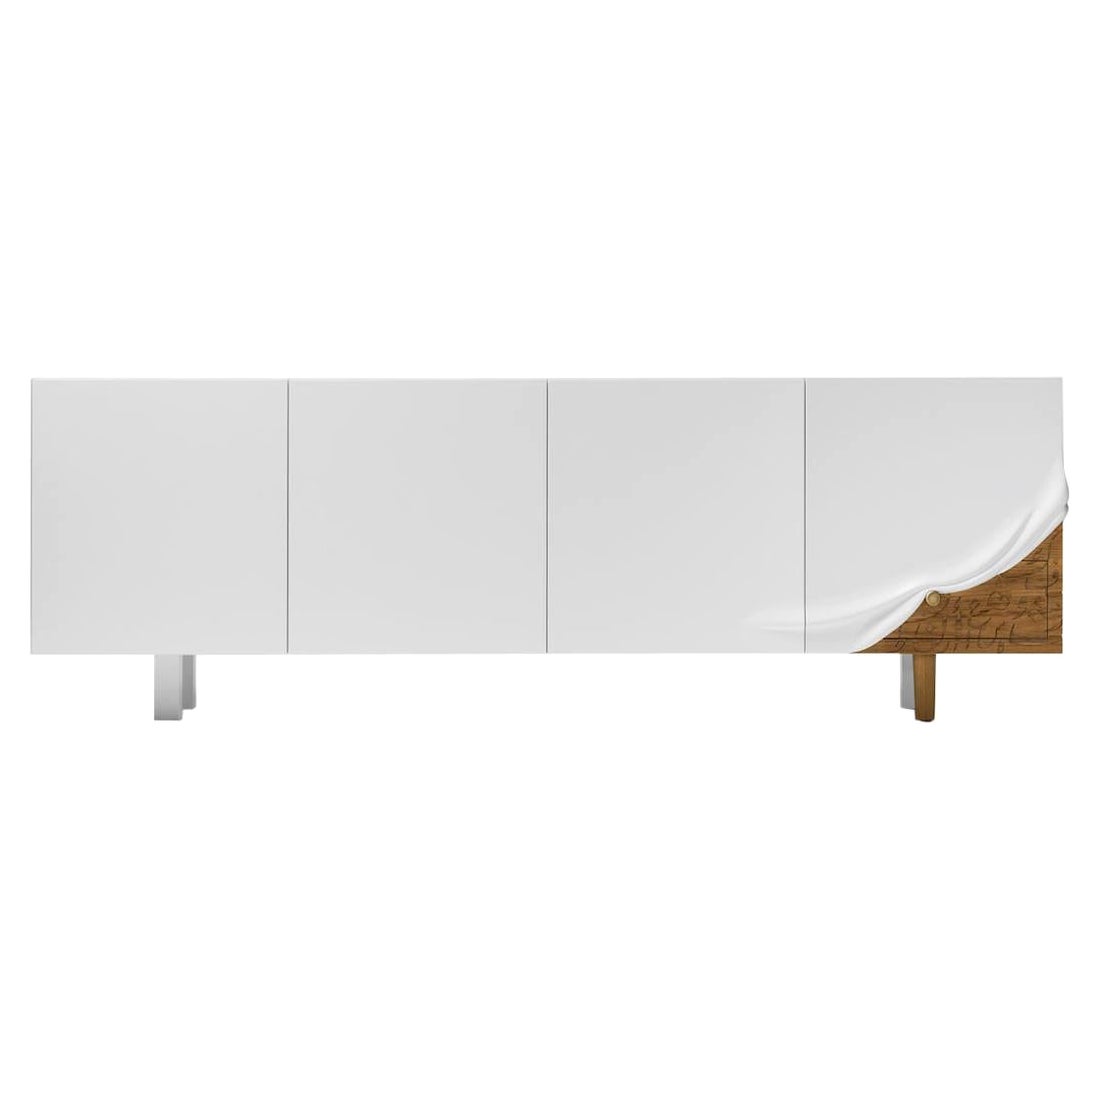 Talisman Sideboard and Credenza by Maysam Al Nasser for BD Art Editions